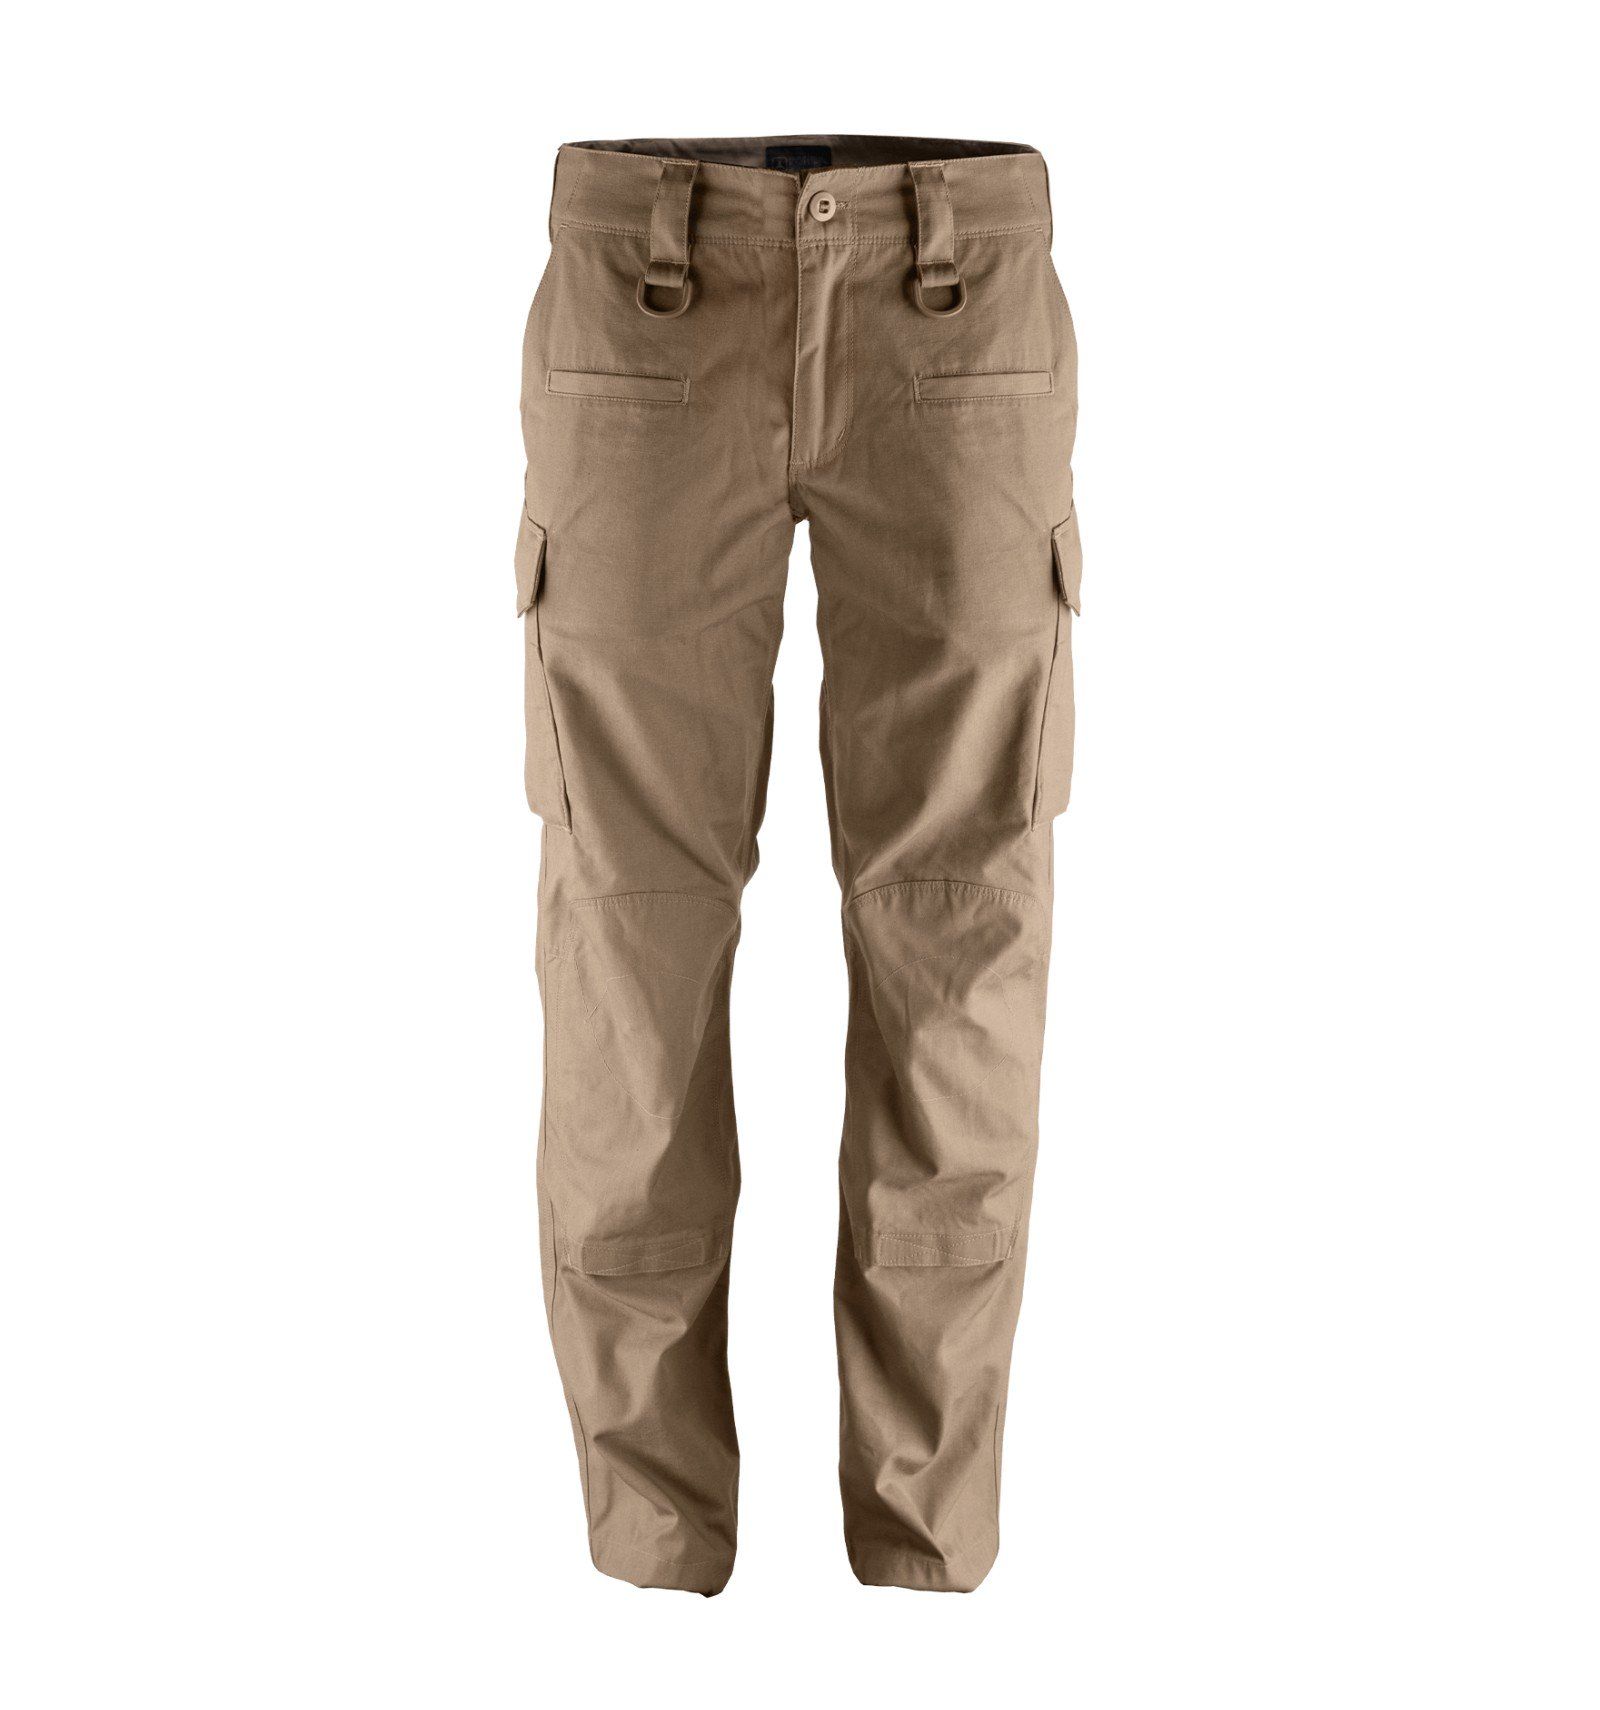 Cotton Men 10 Pocket Joggers Cargo Pants at Rs 400/piece in Mohali | ID:  19806984462